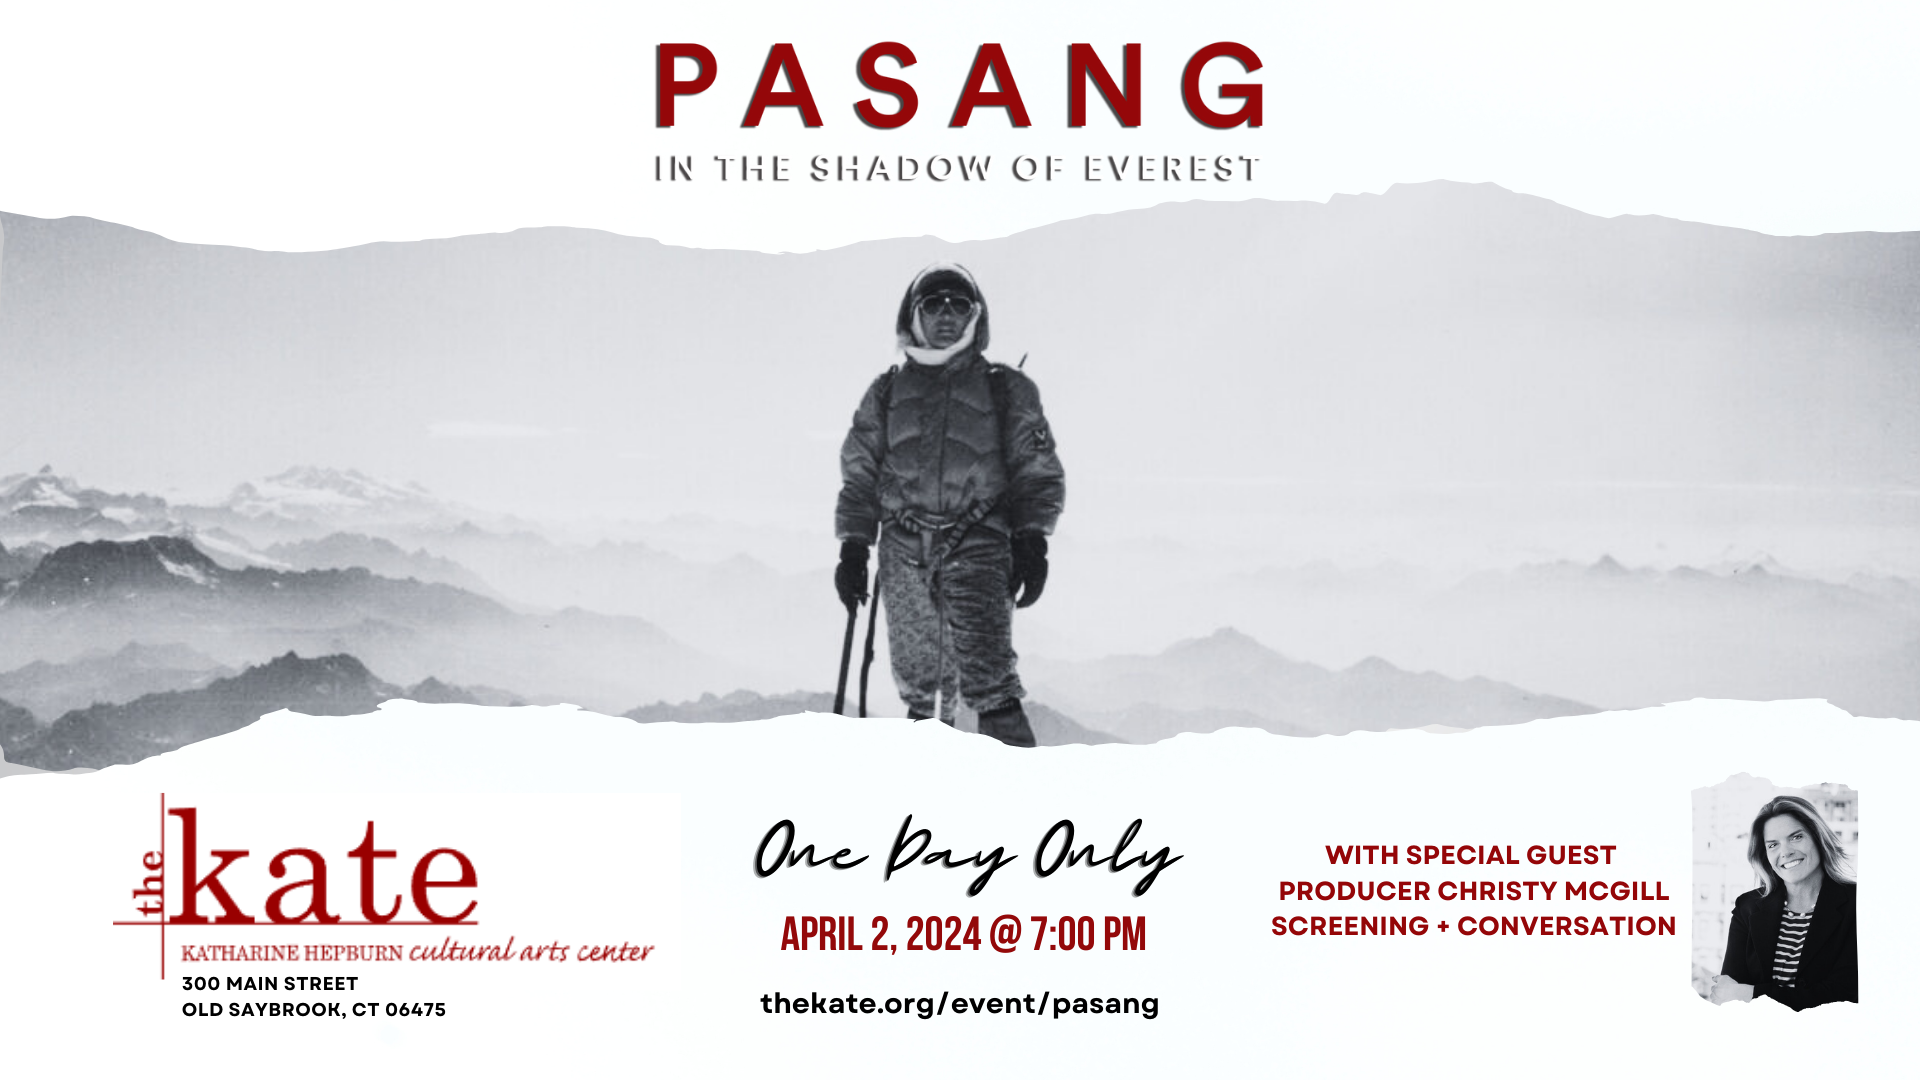 PASANG screens at the Kate in Old Saybrook, CT April 2nd with Q&A afterward with special guest, Christy McGill, Producer